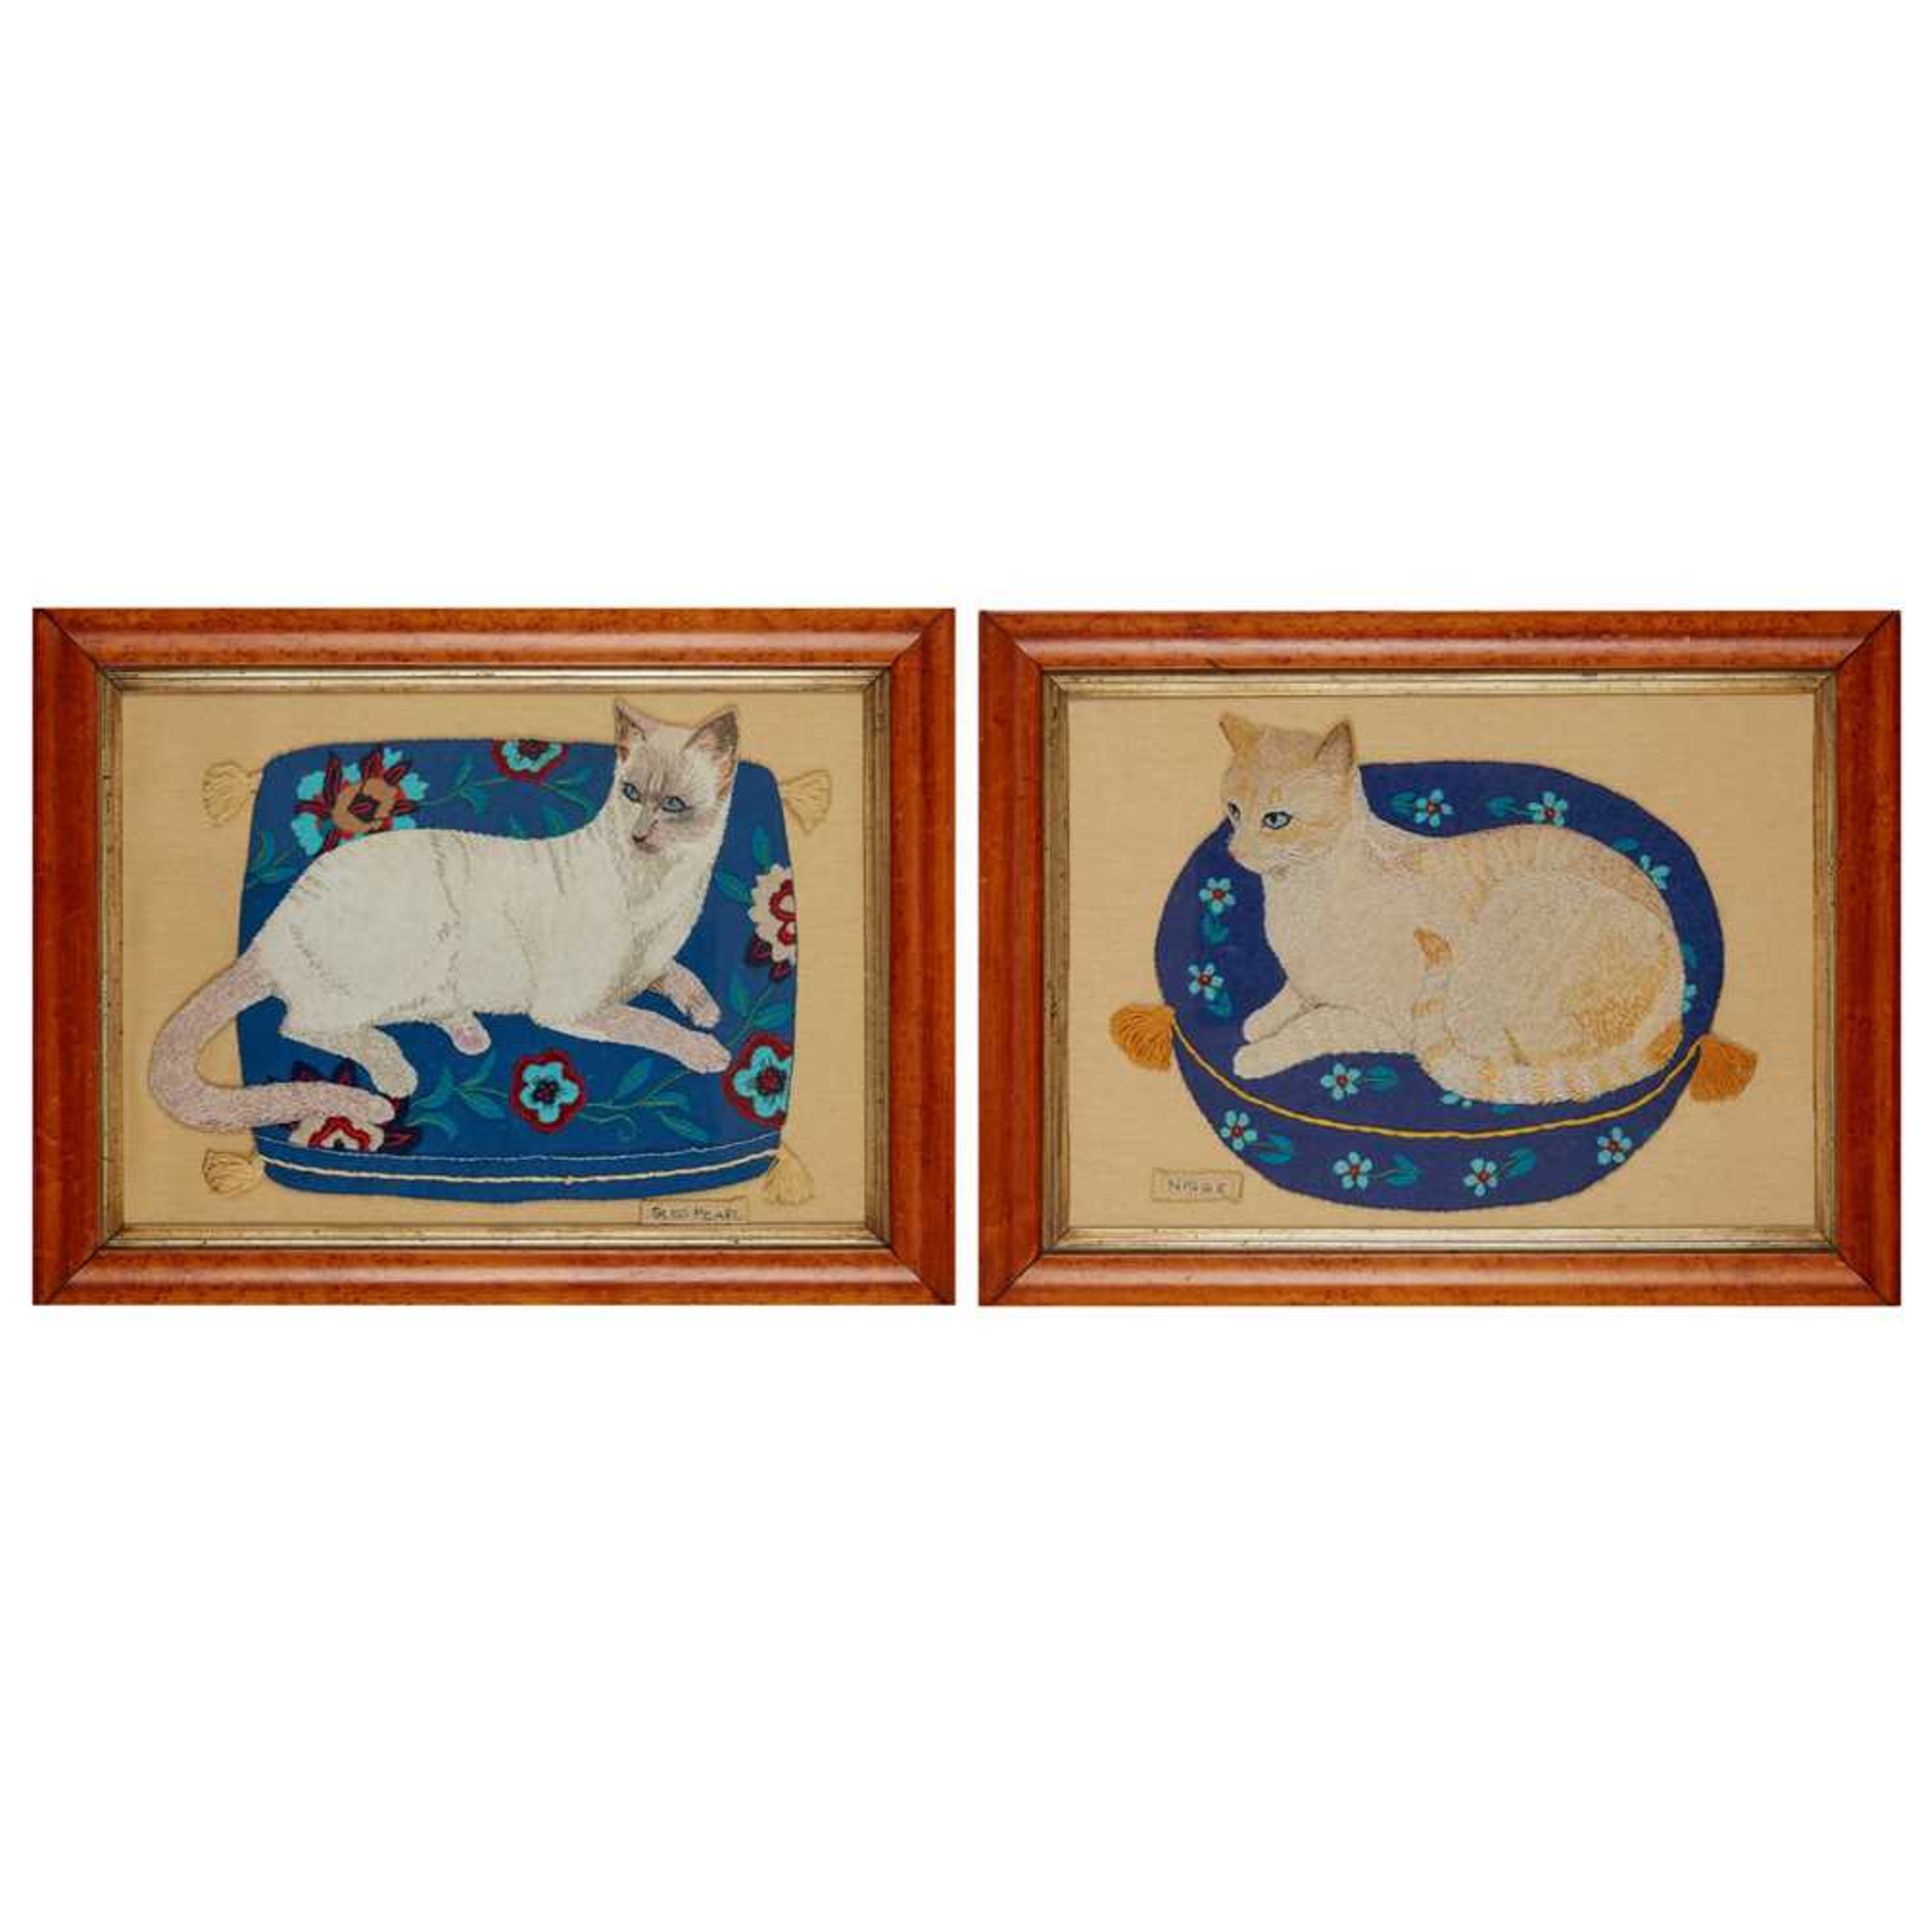 TWO VICTORIAN NEEDLEWORK AND FELT PICTURES OF CATS ON CUSHIONS 19TH CENTURY